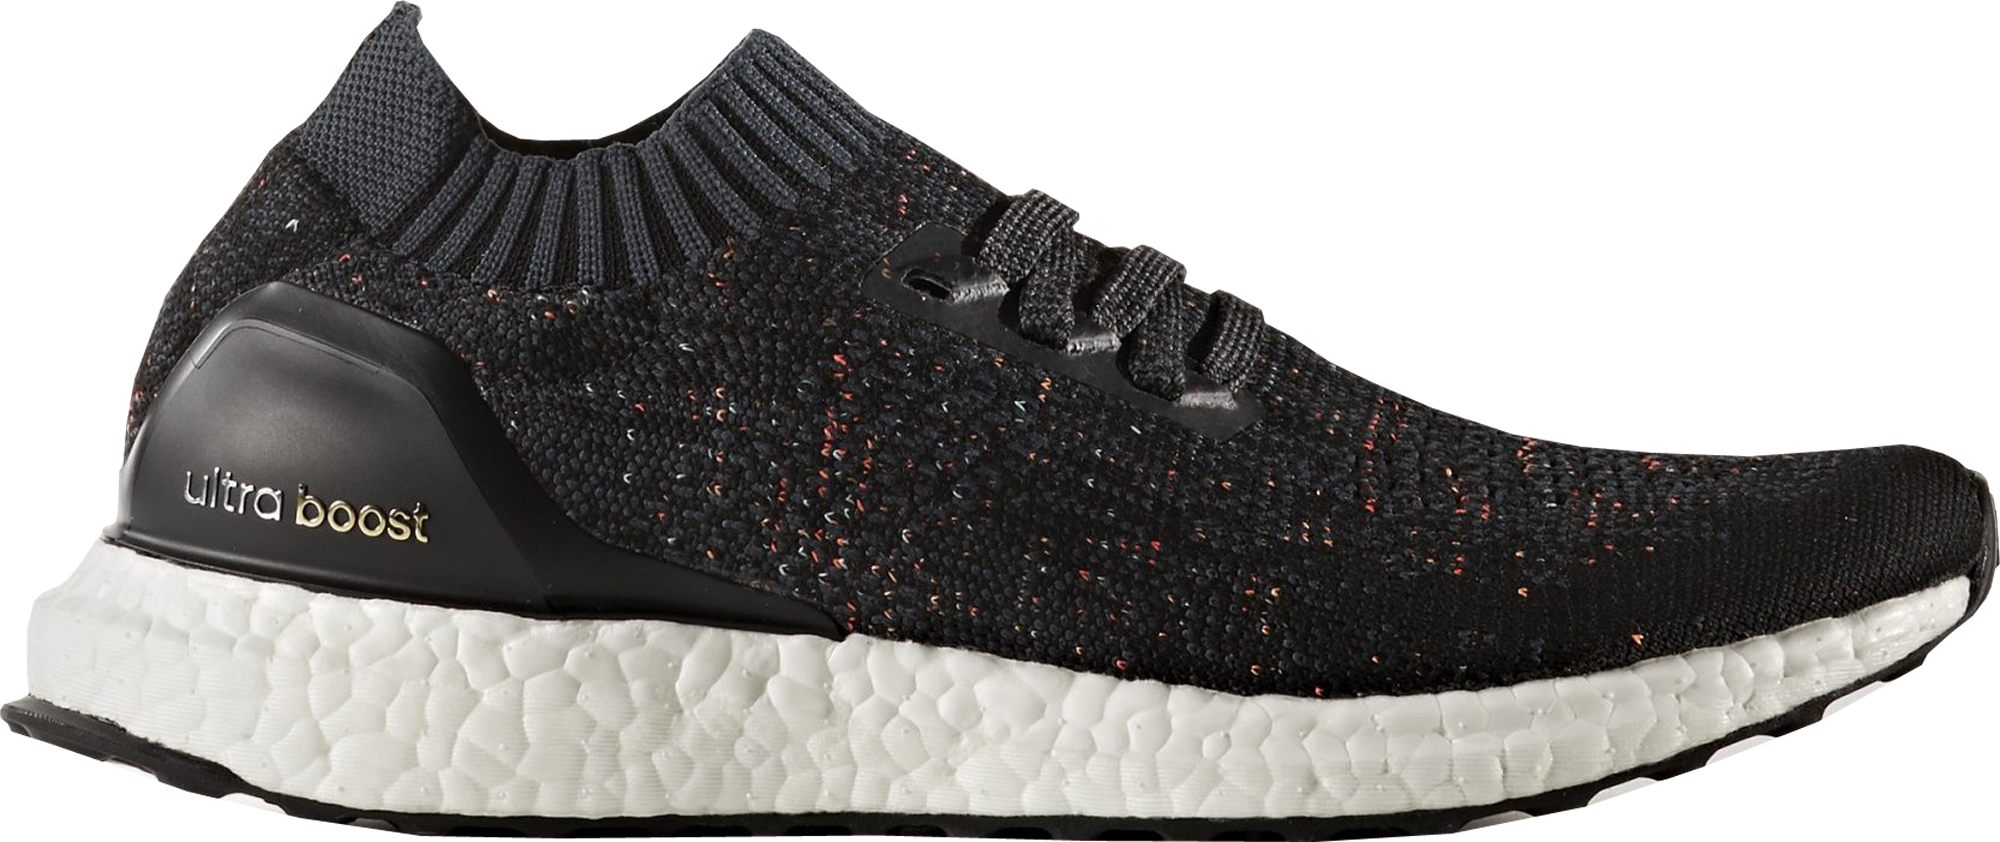 adidas Ultra Boost Uncaged Multi-Color 